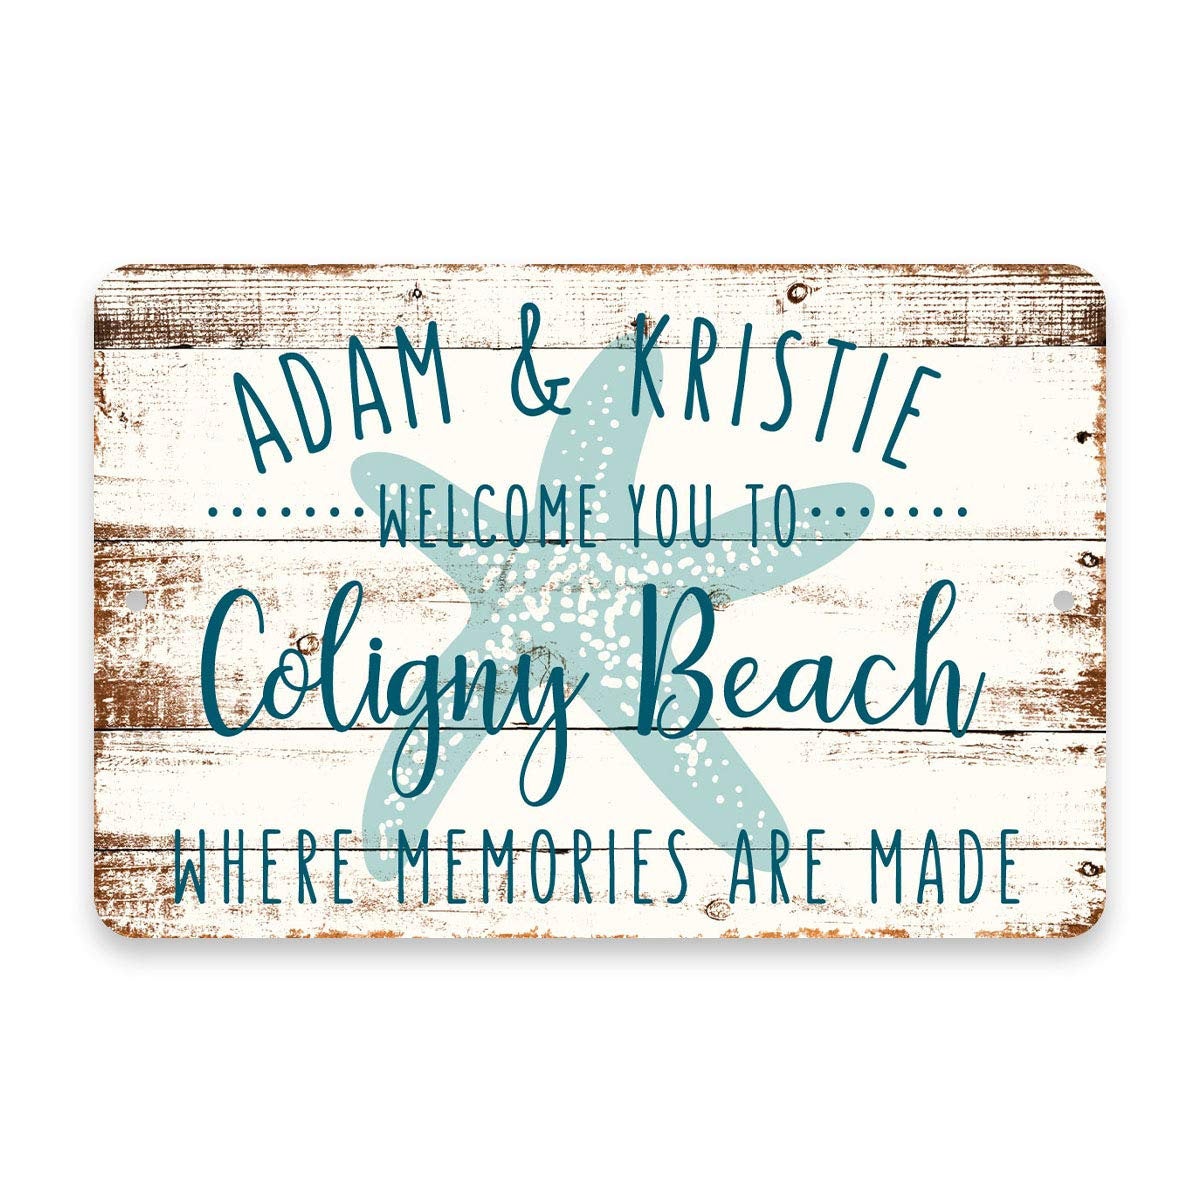 Personalized Welcome to Coligny Beach Where Memories are Made Sign - 8 X 12 Metal Sign with Wood Look